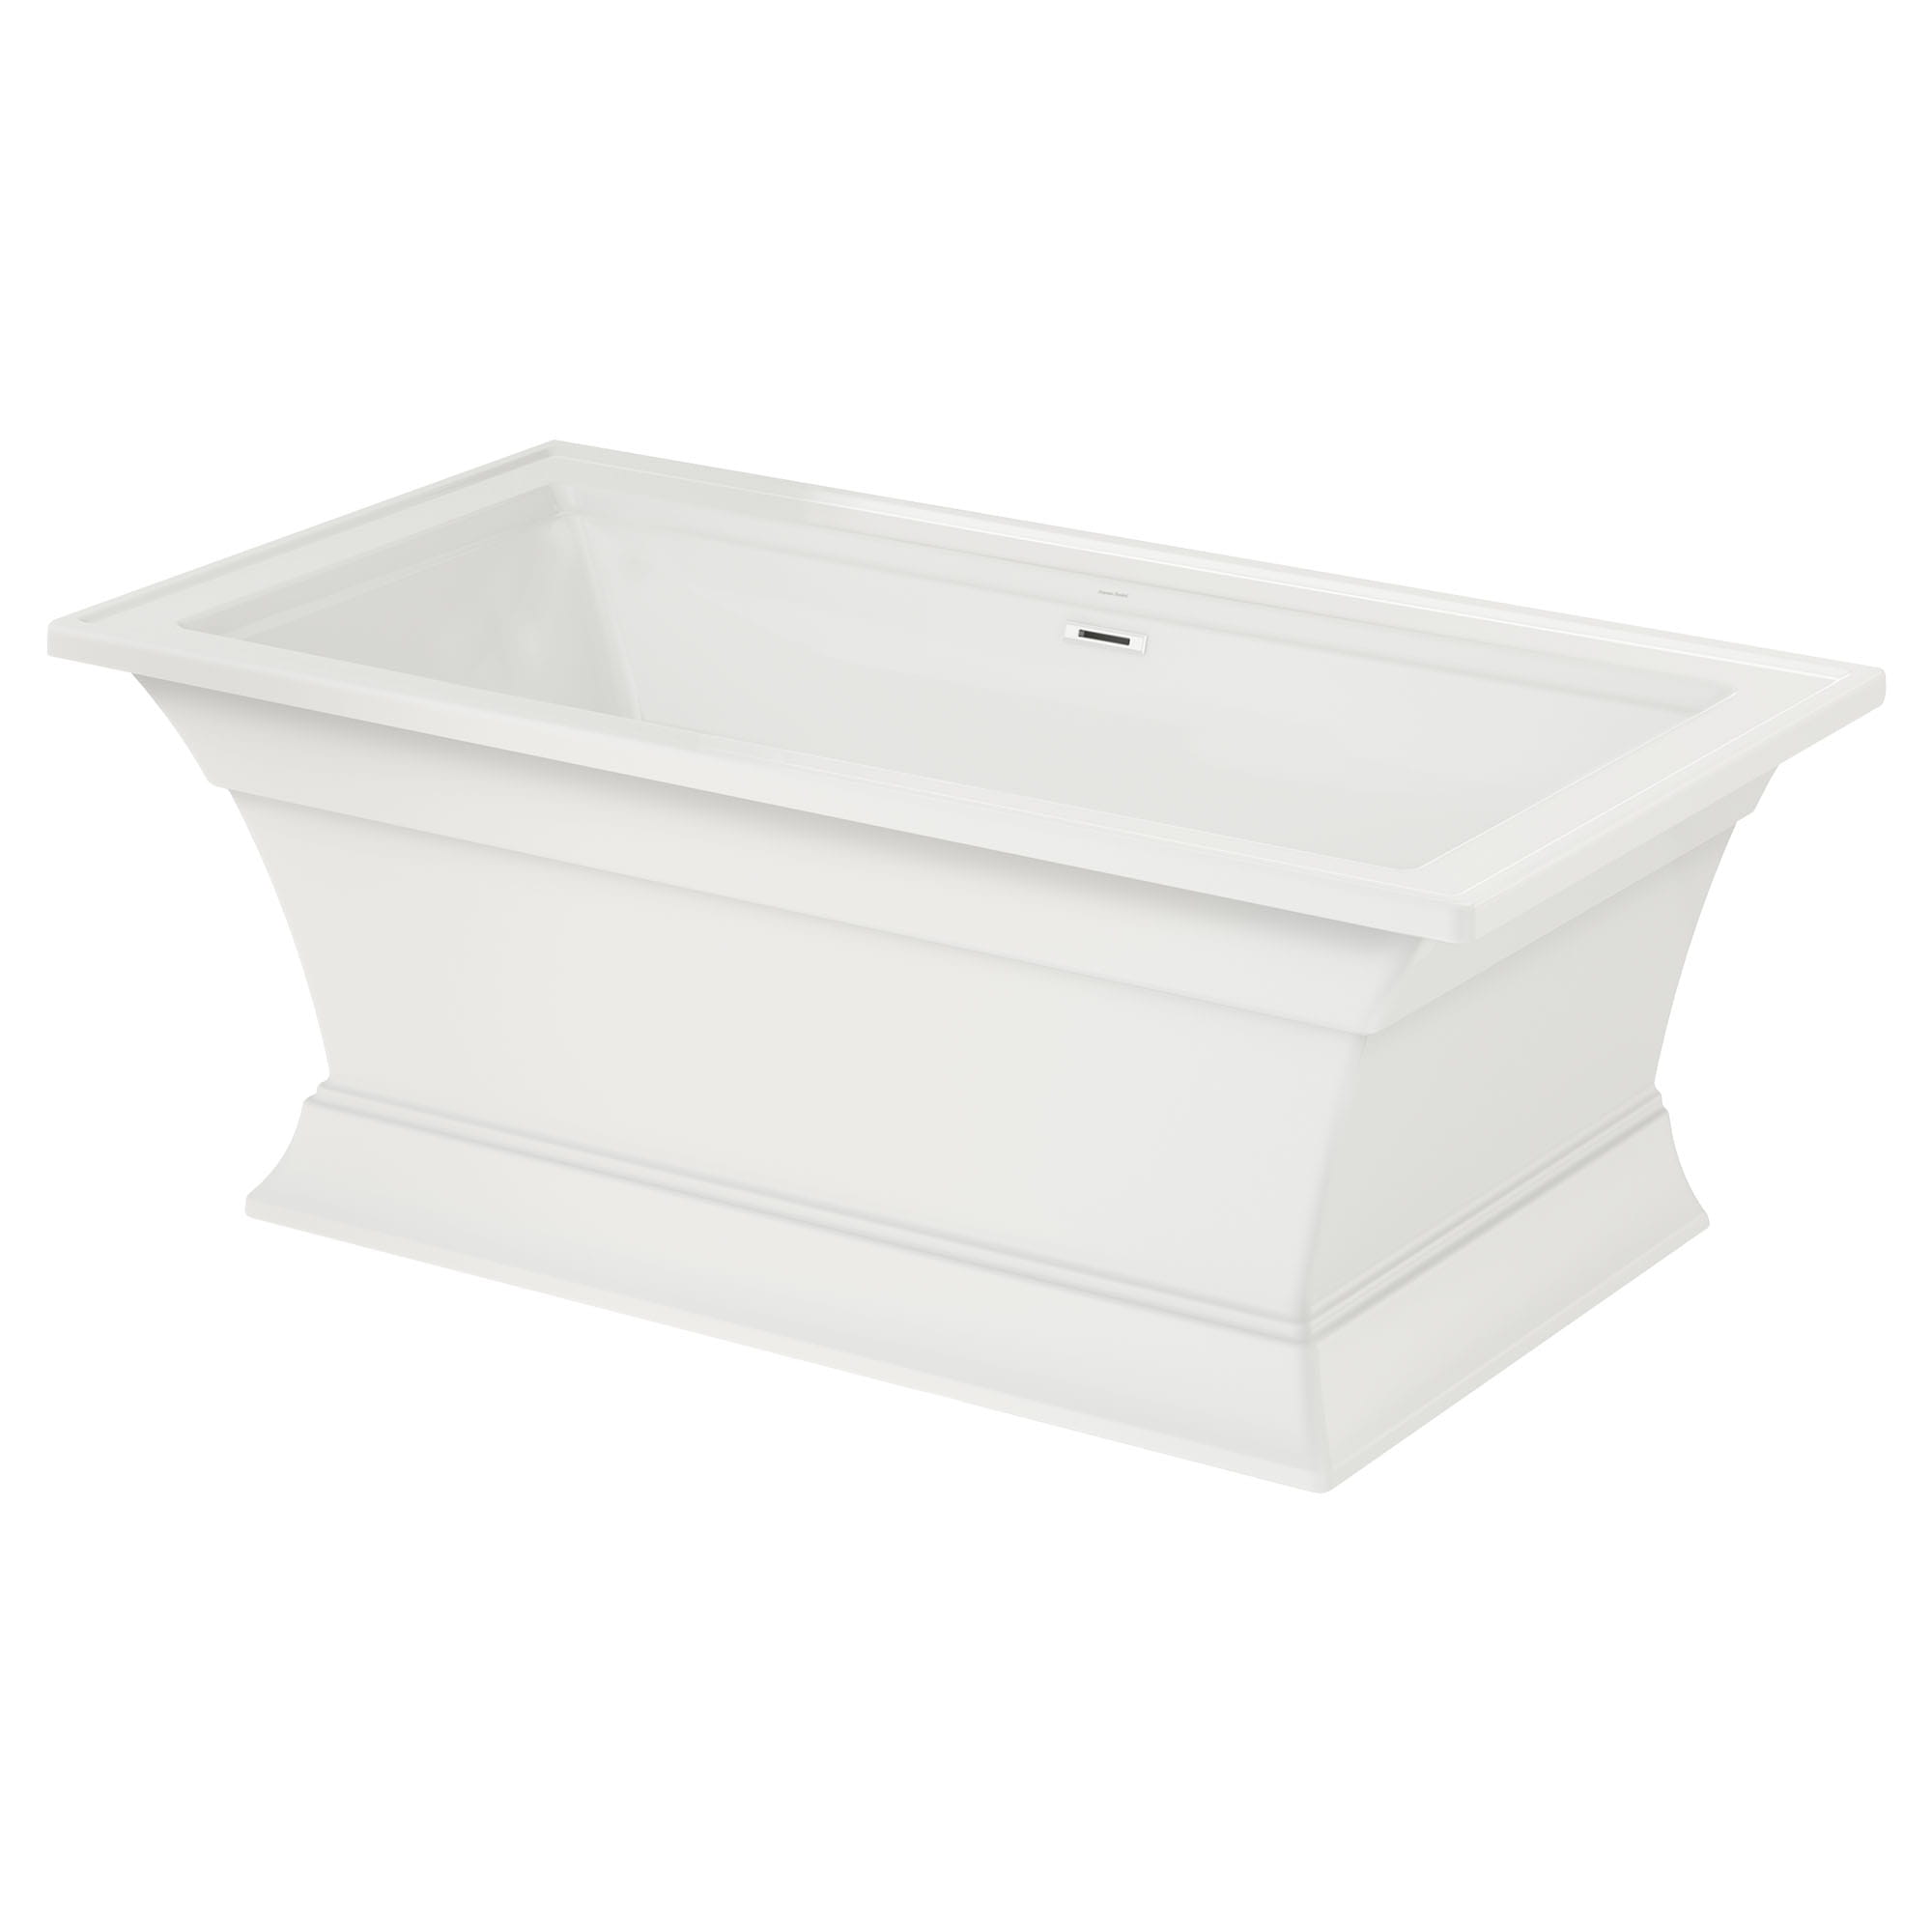 Town Square® S Freestanding Bathtub Overflow Cover and Drain Kit